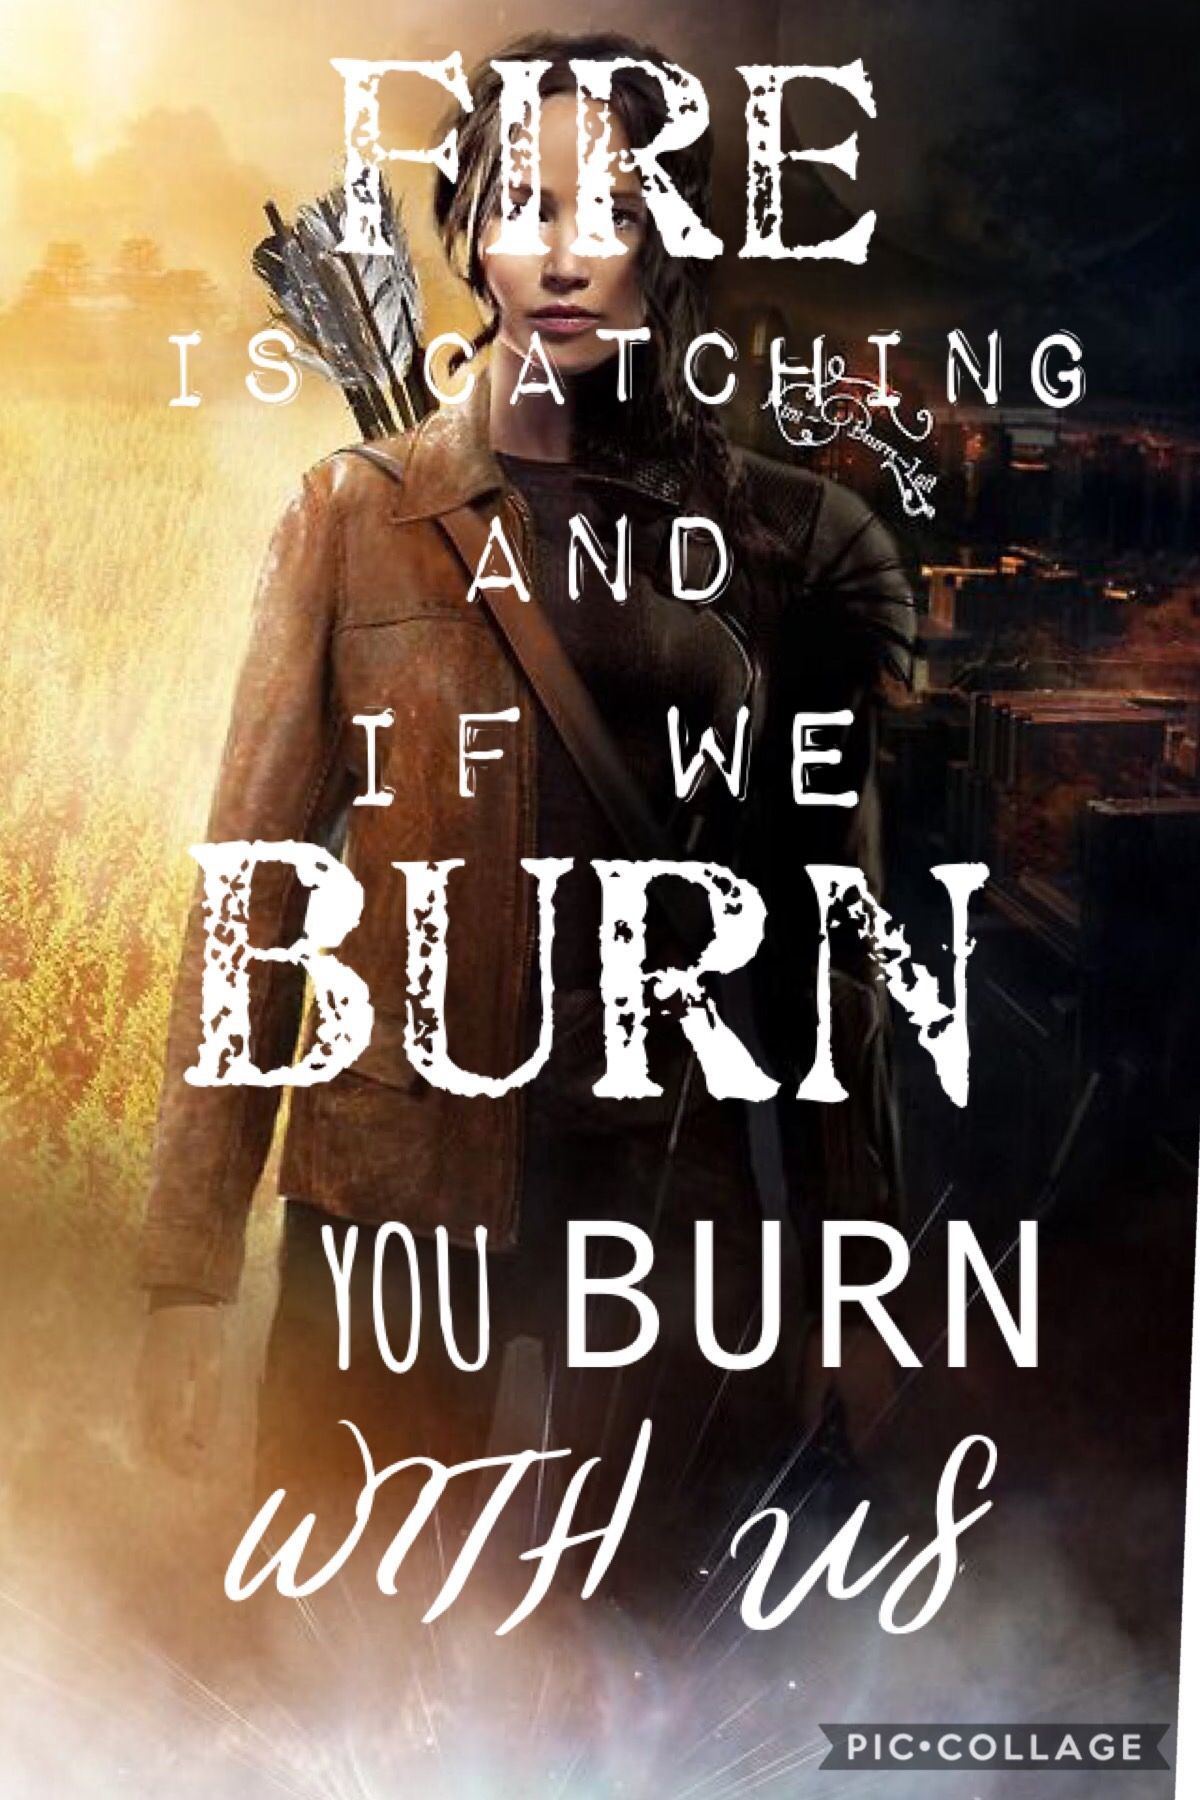 Hunger games wallpaper quote. Hunger games quotes, Hunger games fandom, Hunger games